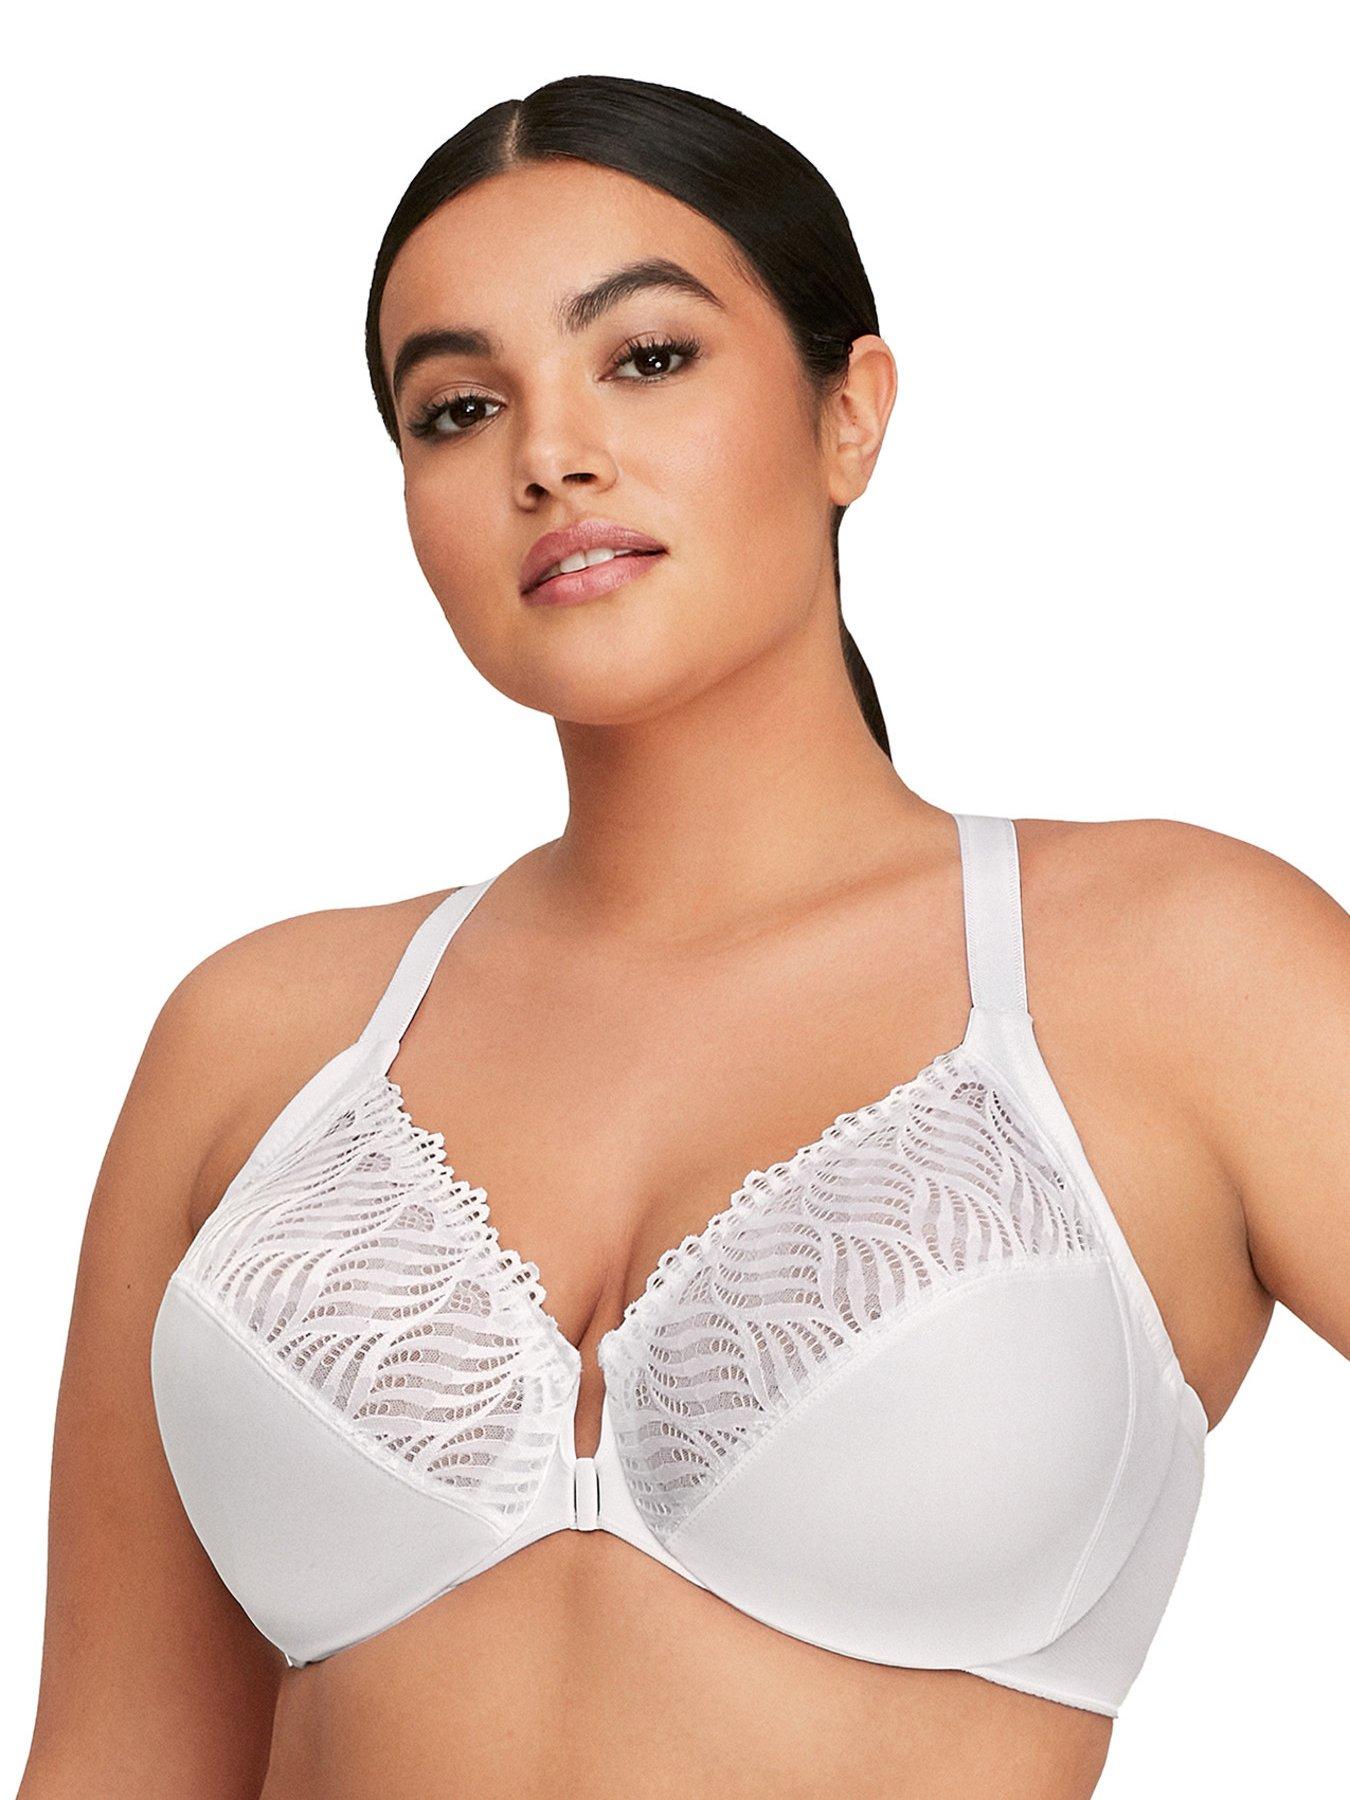 Buy Glamorise Women's MagicLift Front Close Support Bra, White, 44G at